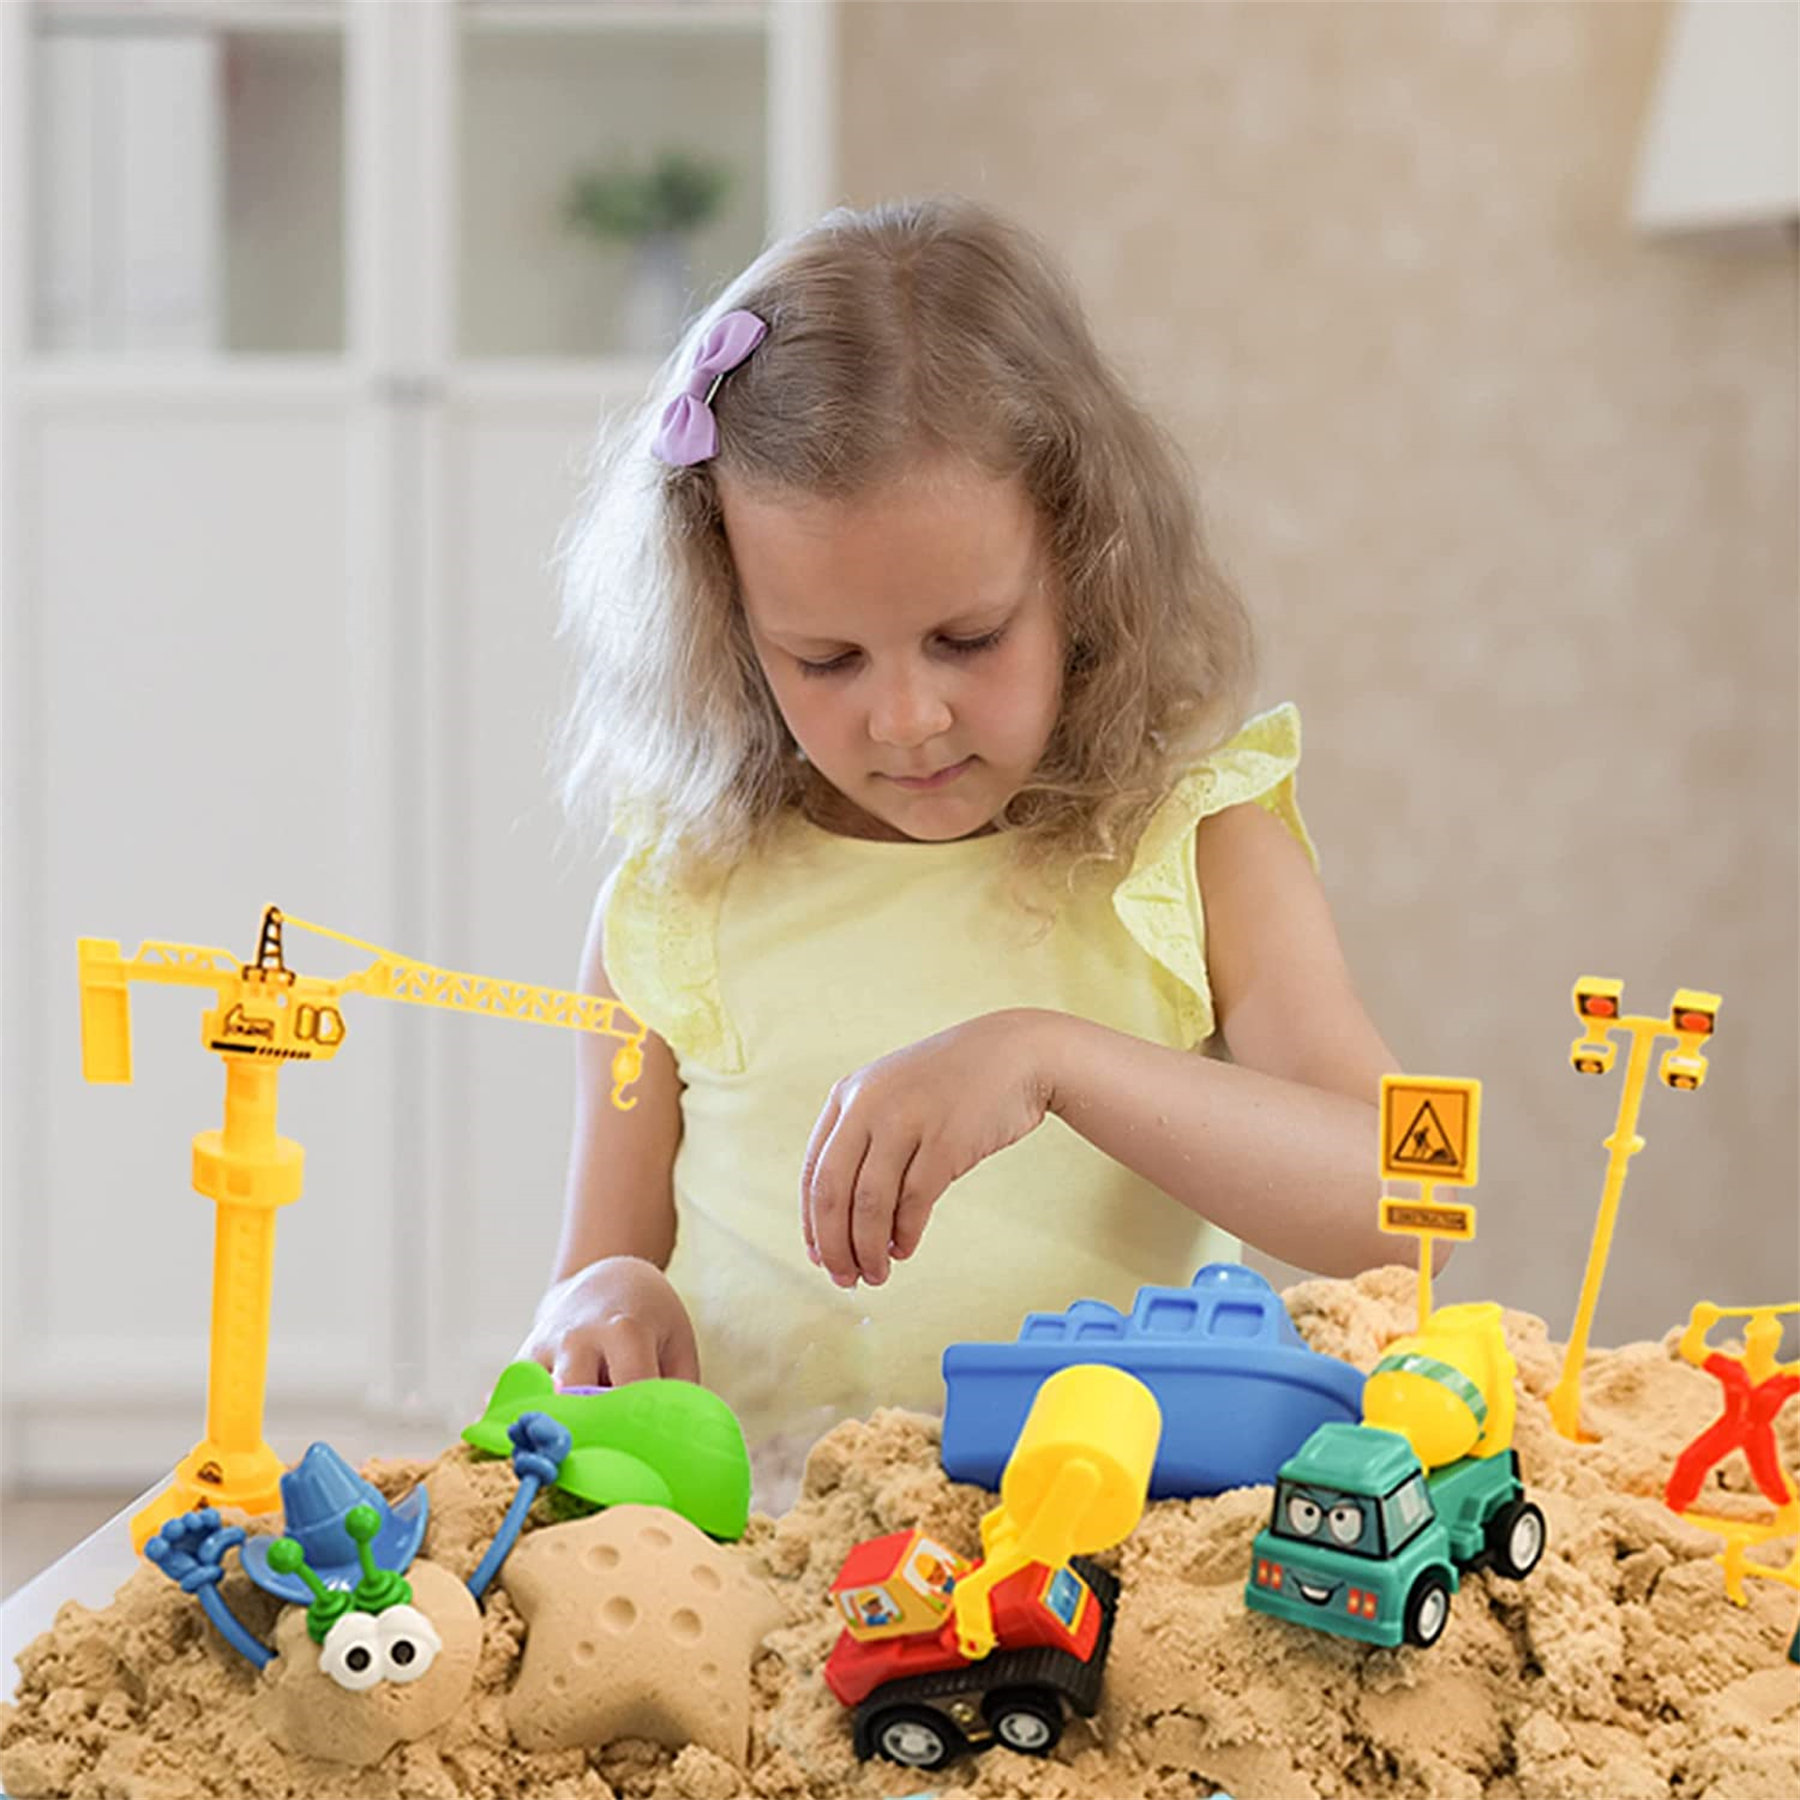 6 Mini Construction Trucks Play Construction Sand Kit 3lbs Sand with 2 Colors 